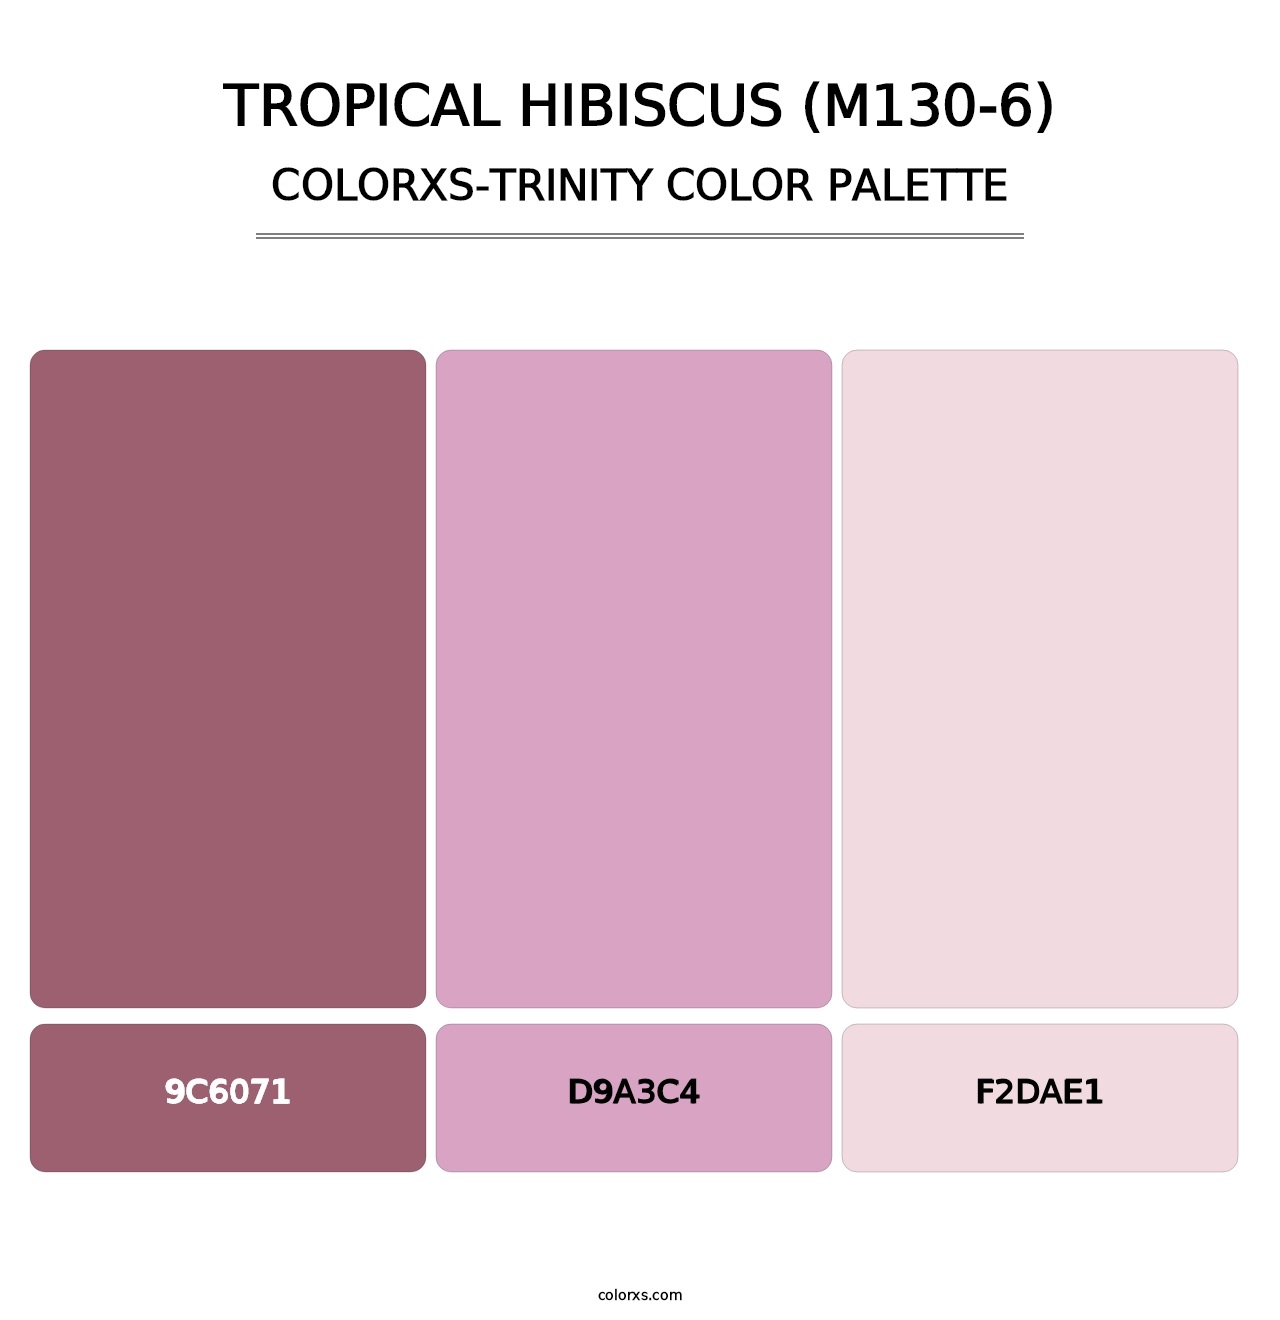 Tropical Hibiscus (M130-6) - Colorxs Trinity Palette